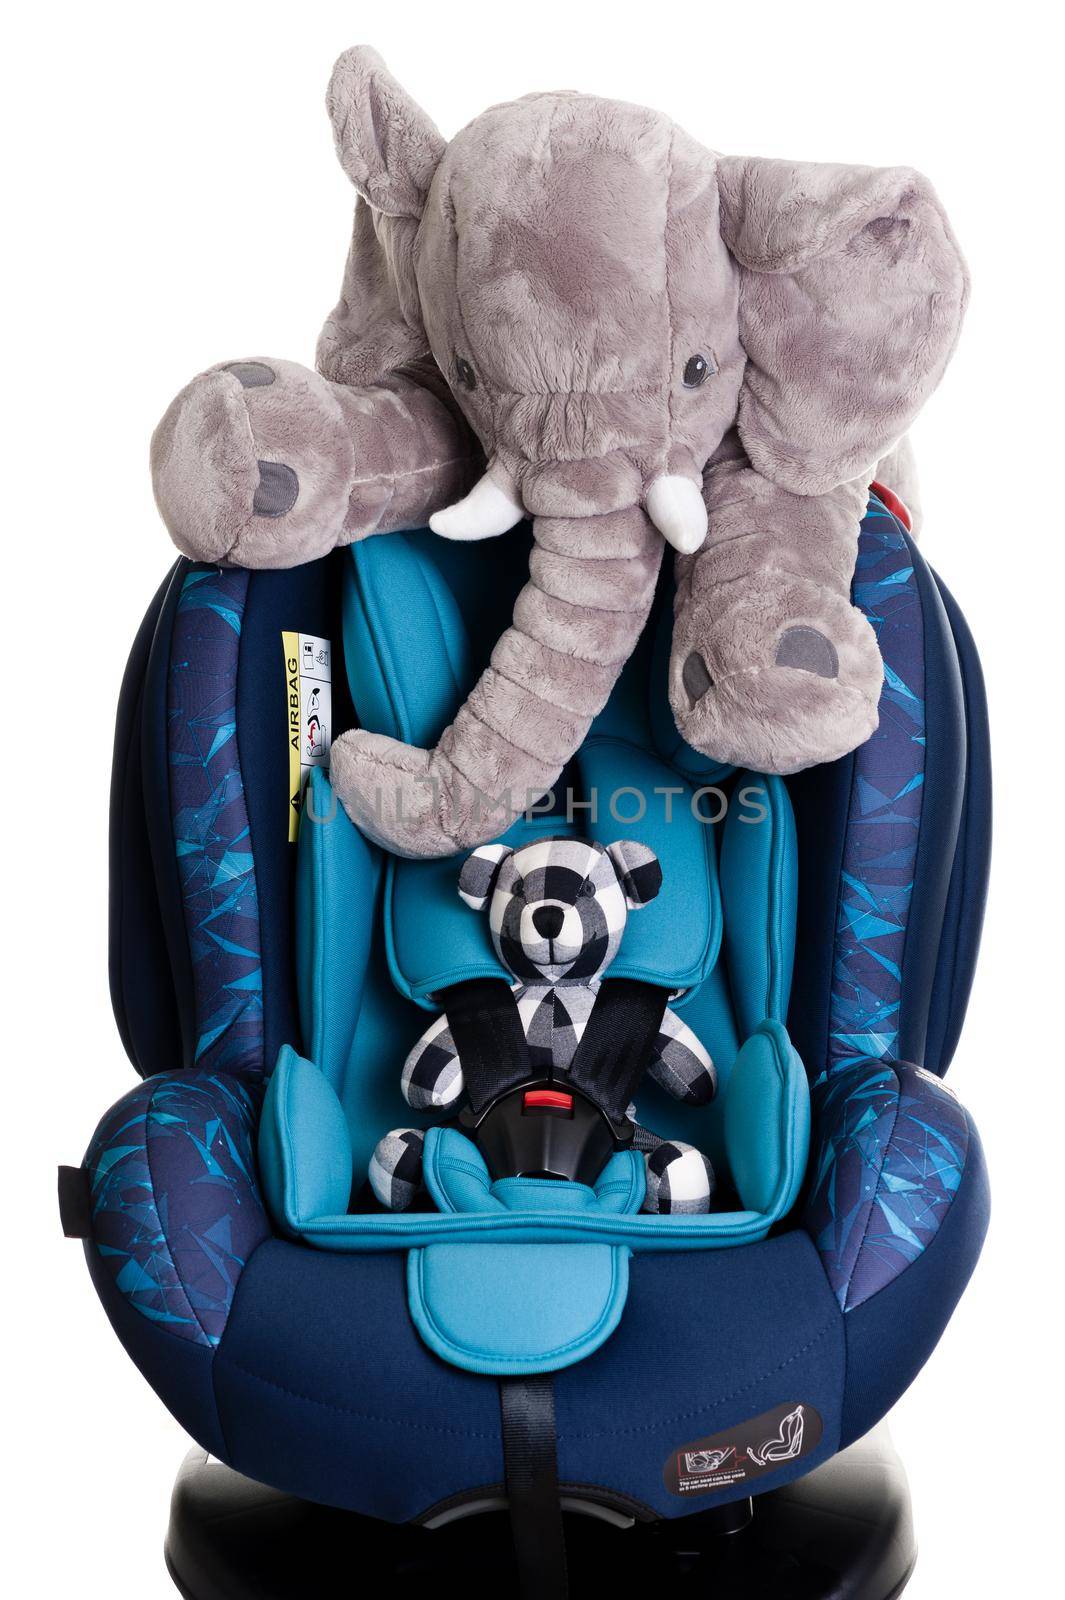 teddy bear and elephant doll in blue child safety seat, seat designed specifically to protect children from injury or death during collisions.